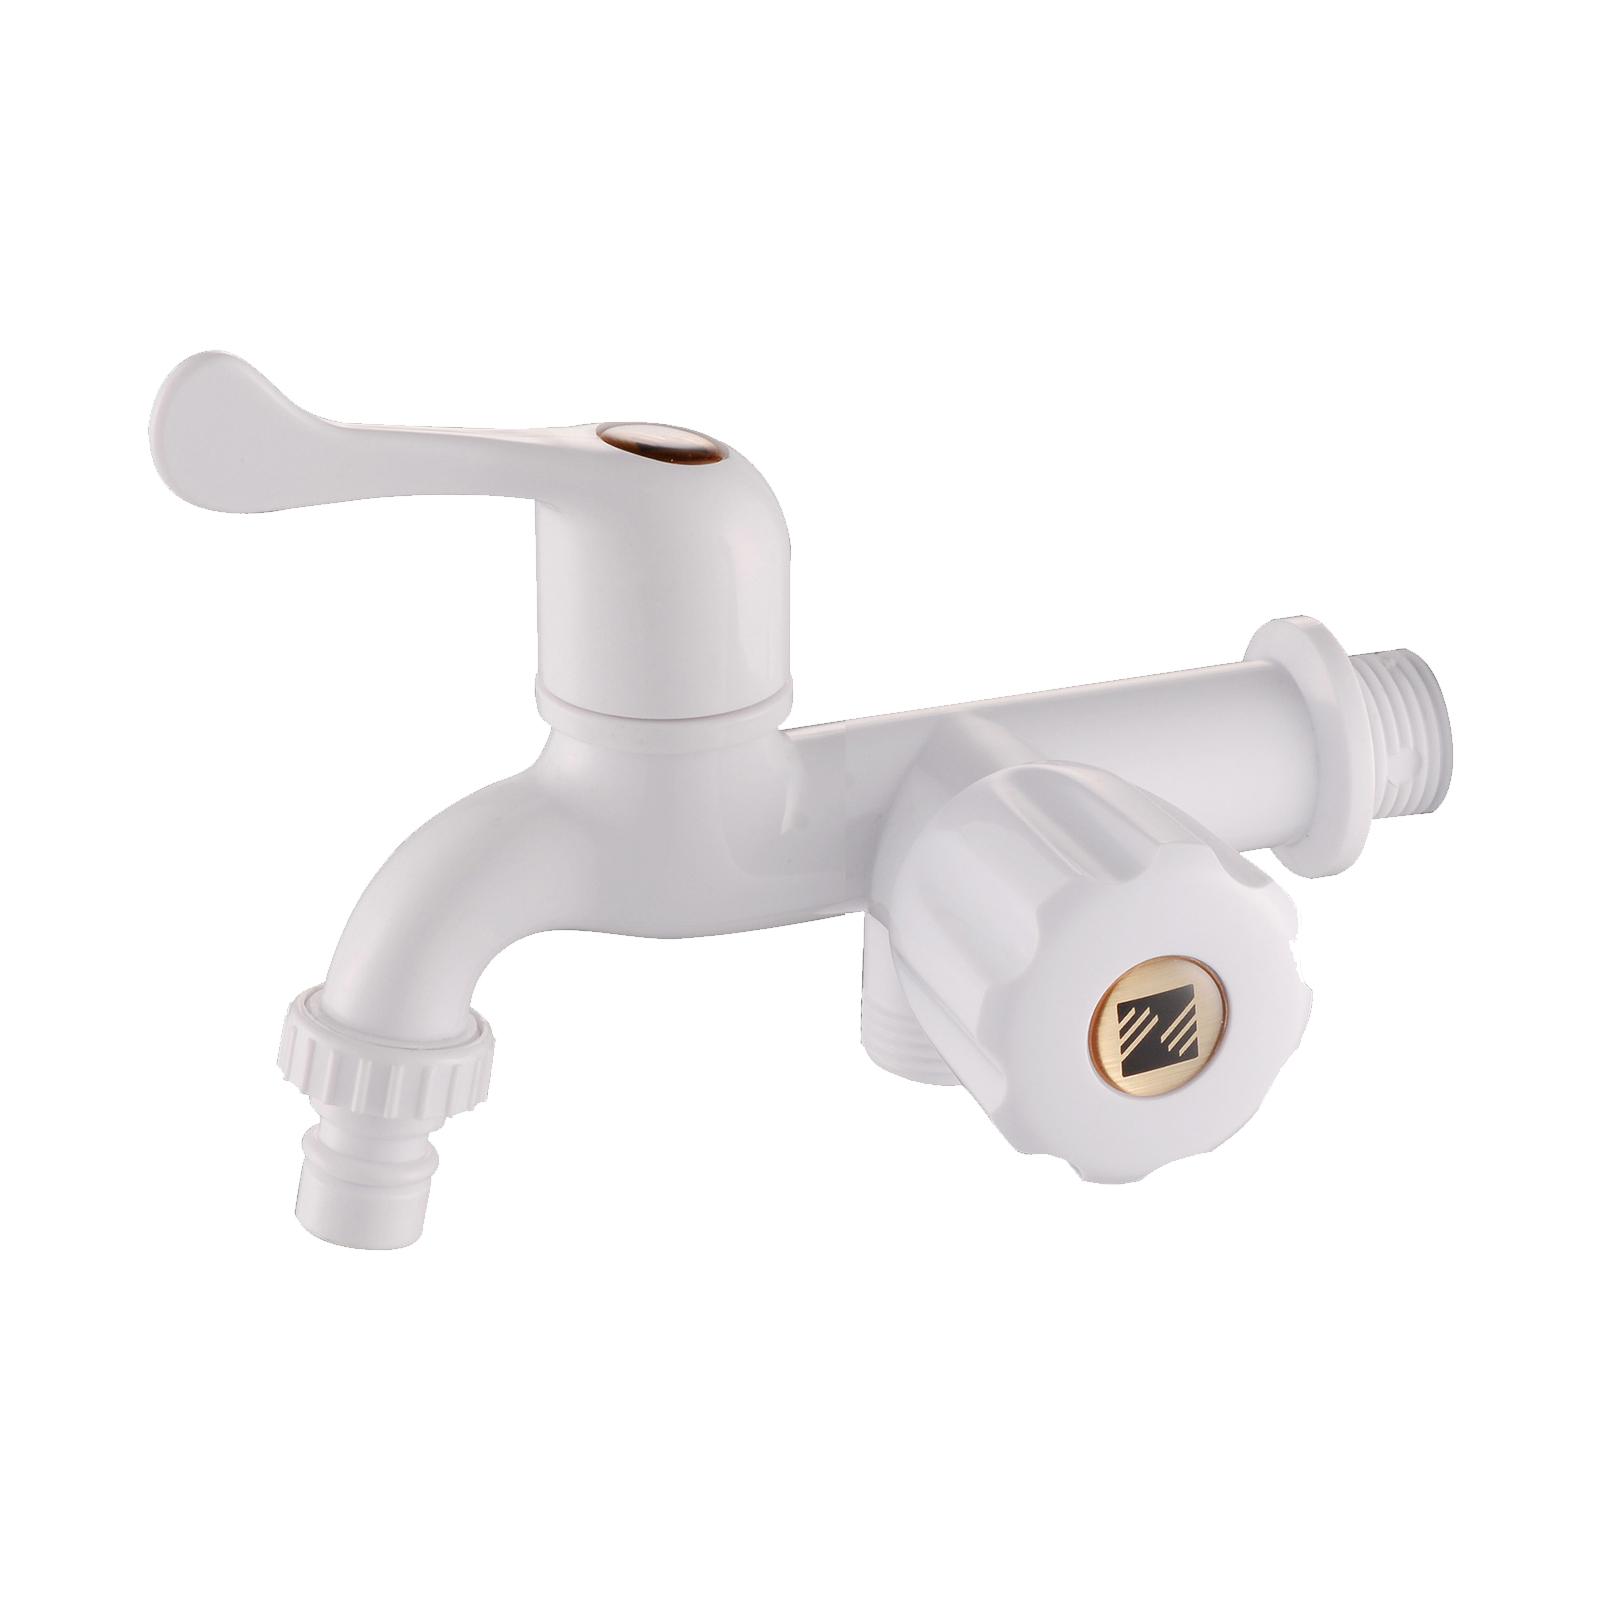 Washing Machine Water Faucet Outlet Valve Garden Tap for Home Garden Style C